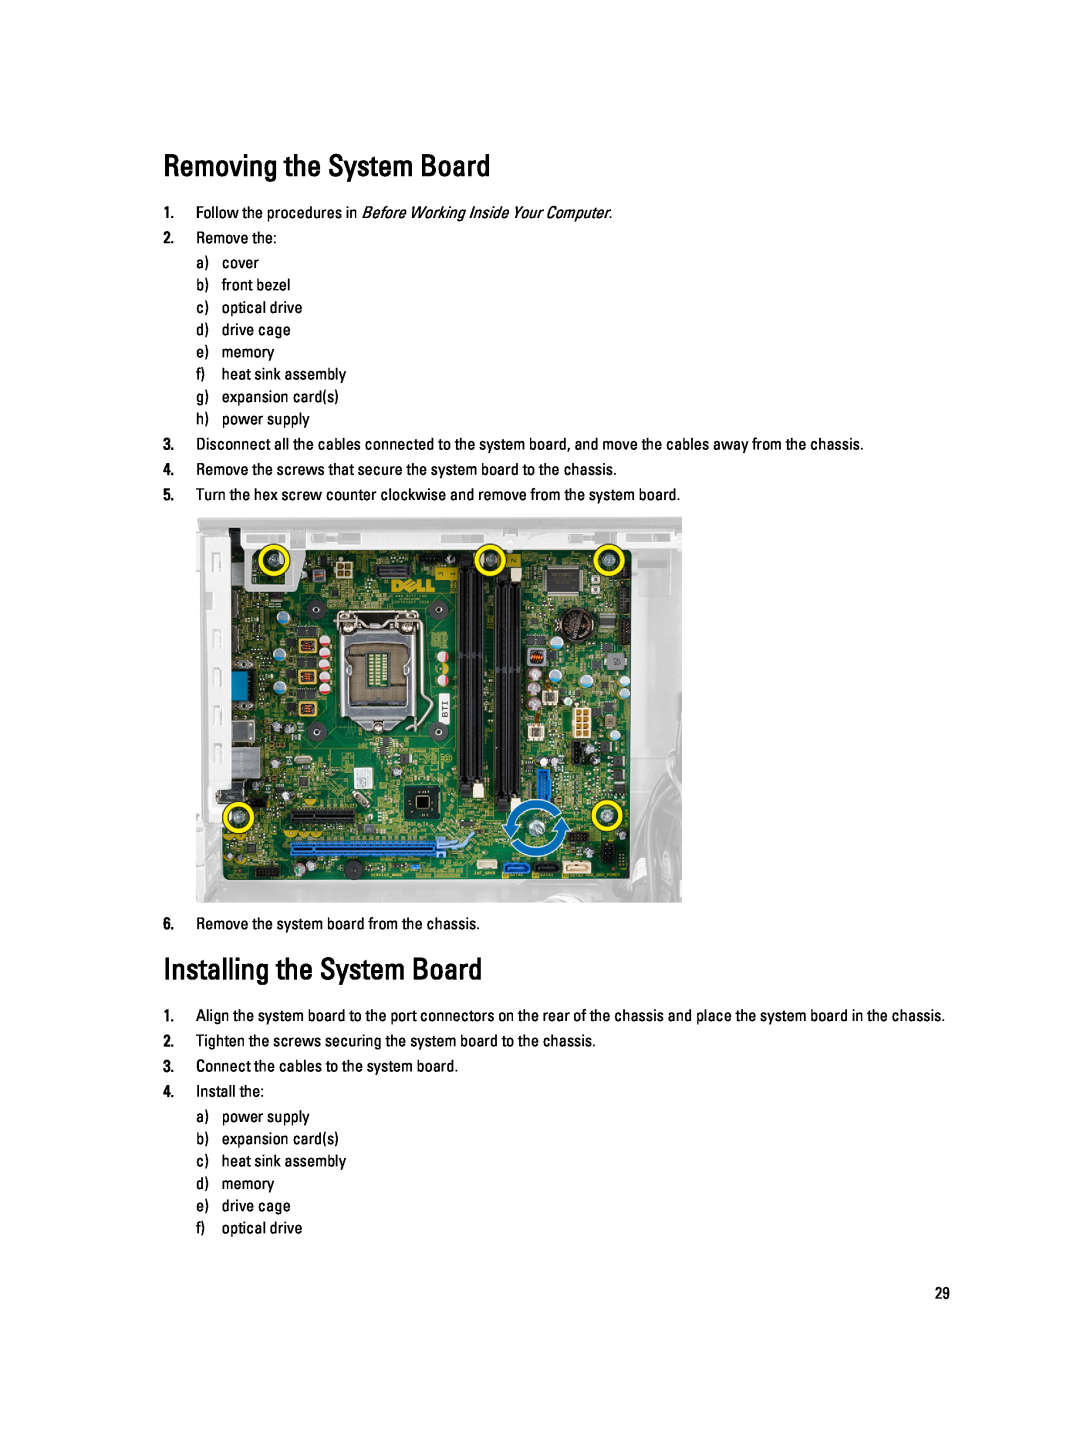 Dell T1700 owner manual Removing the System Board, Installing the System Board 